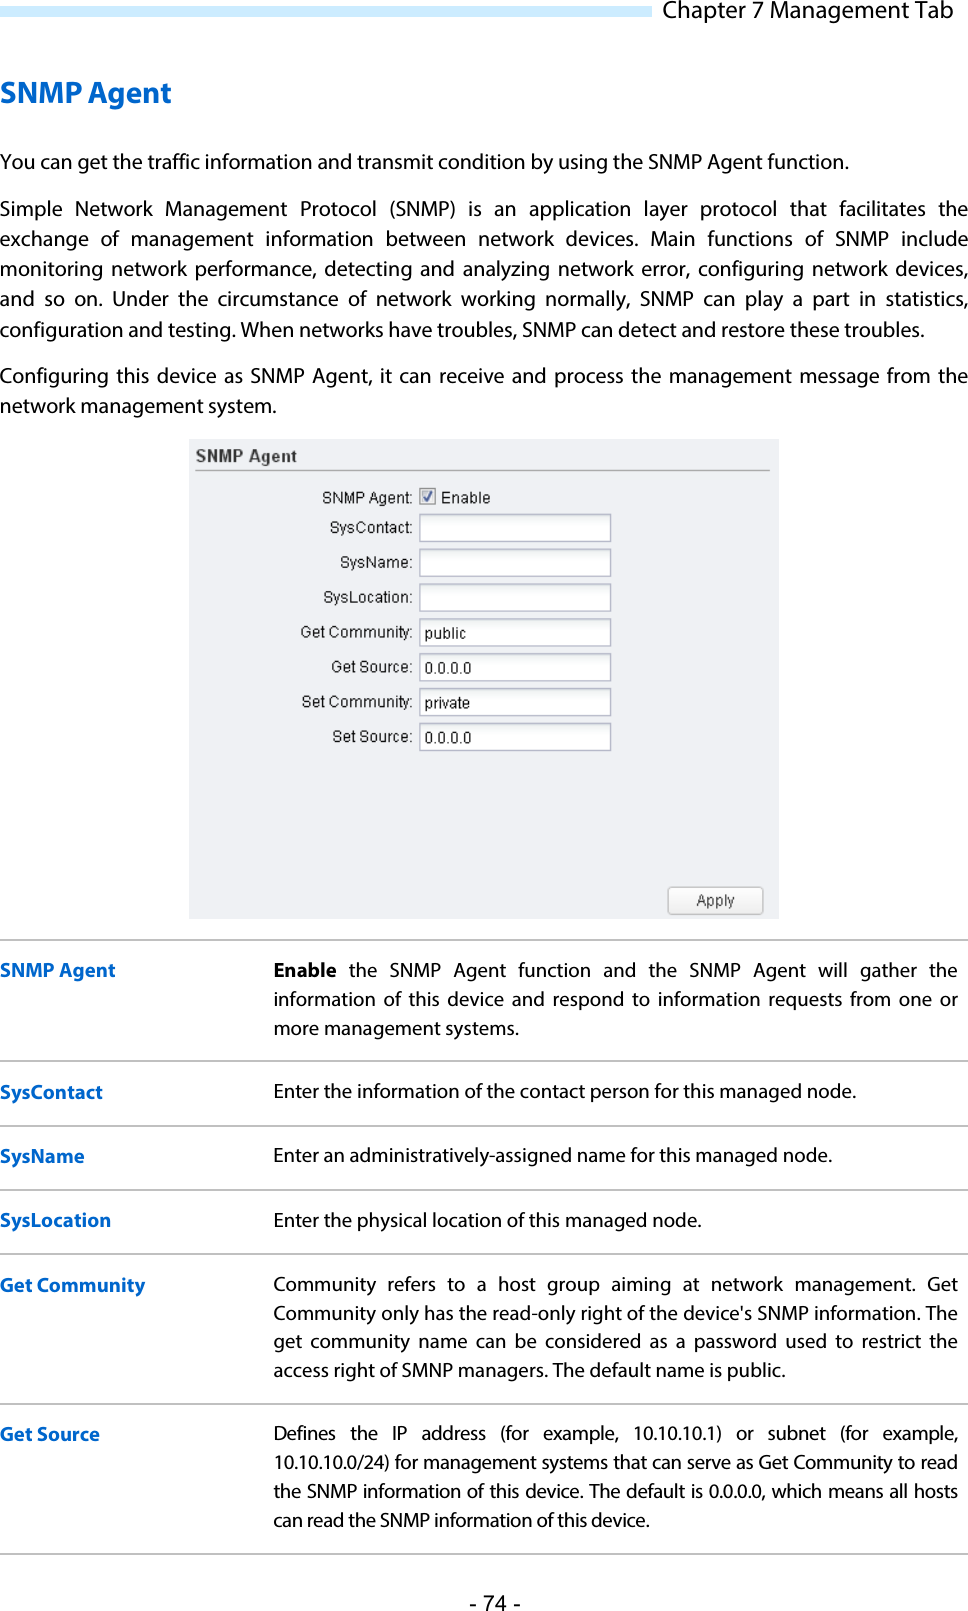  Chapter 7 Management Tab SNMP Agent You can get the traffic information and transmit condition by using the SNMP Agent function. Simple Network Management Protocol (SNMP) is an application layer protocol that facilitates the exchange of management information between network devices. Main functions of SNMP include monitoring network performance, detecting and analyzing network error, configuring network devices, and so on. Under the circumstance of network working normally, SNMP can play a part in statistics, configuration and testing. When networks have troubles, SNMP can detect and restore these troubles. Configuring this device as SNMP Agent, it can receive and process the management message from the network management system.   SNMP Agent Enable the SNMP Agent function and the SNMP Agent will gather the information of this device and respond to information requests from one or more management systems. SysContact Enter the information of the contact person for this managed node. SysName Enter an administratively-assigned name for this managed node. SysLocation Enter the physical location of this managed node. Get Community Community refers to a host group aiming at network management.  Get Community only has the read-only right of the device&apos;s SNMP information. The get  community name can be considered  as  a password used to restrict the access right of SMNP managers. The default name is public. Get Source Defines the IP address (for example, 10.10.10.1) or subnet  (for example, 10.10.10.0/24) for management systems that can serve as Get Community to read the SNMP information of this device. The default is 0.0.0.0, which means all hosts can read the SNMP information of this device. - 74 - 